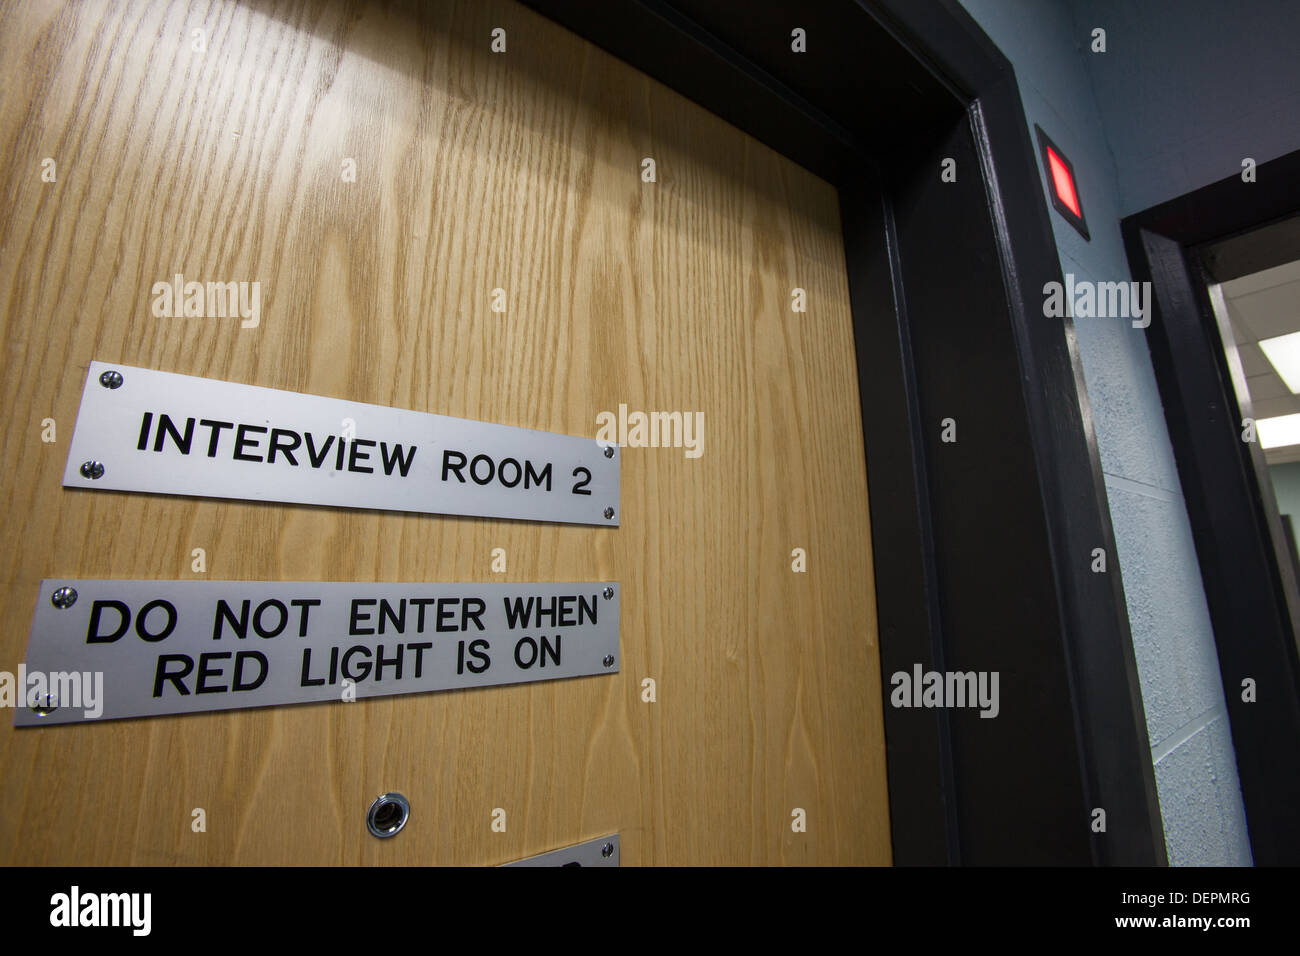 Police Station Interview Room Stock Photo 60735572 Alamy